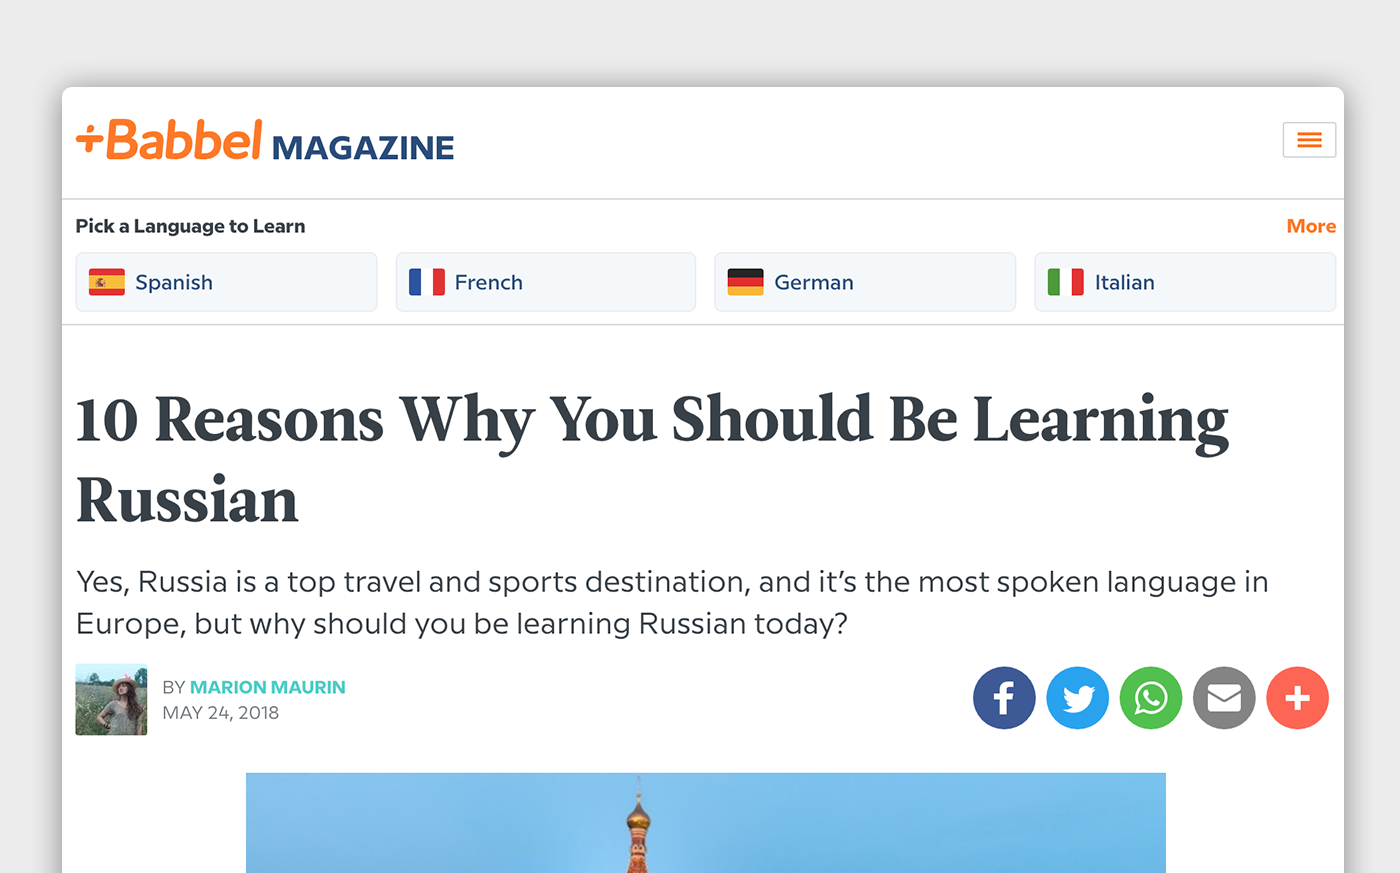 The Babbel Magazine front page with language learning links, a headline, lede, and social share links